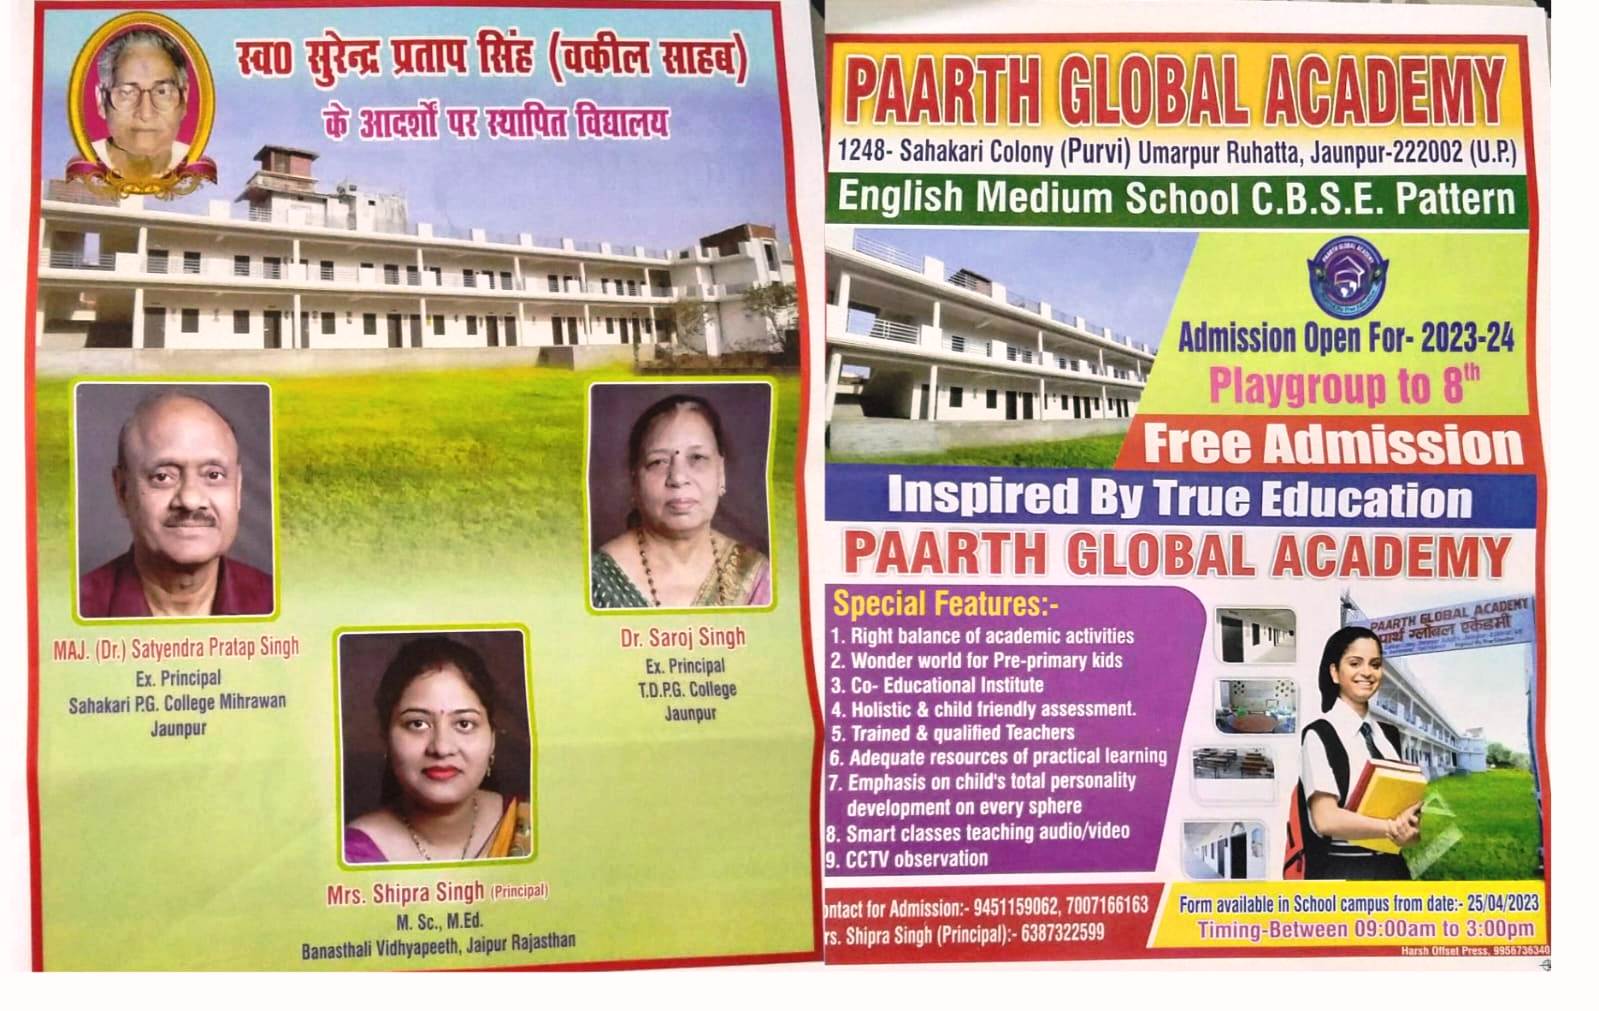 *स्व. सुरेन्द्र प्रताप सिंह (वकील साहब) के आदर्शों पर स्थापित विद्यालय - PAARTH GLOBAL ACADEMY | 1248- Sahakari Colony (Purvi) Umarpur Ruhatta, Jaunpur-222002 (U.P.) | English Medium School C.B.S.E. Pattern | Admission Open For-2023-24 | Playgroup to 8th | Free Admission | Inspired By True Education | PAARTH GLOBAL ACADEMY | Special Features:- 1. Right balance of academic activities. 2. Wonder world for Pre-primary kids. 3. Co-Educational Institute. 4. Holistic & child friendly assessment. 5. Trained & qualified Teachers. 6. Adequate resources of practical learning. 7. Emphasis on child's total personality development on every sphere. 8. Smart classes teaching audio/video 9. CCTV observation | Contact for Admission: 9451159062, 7007166163 | Mrs. Shipra Singh (Principal): 6387322599 | Form available in School campus from date:- 25/04/2023 Timing-Between 09:00am to 3:00pm | NayaSaveraNetwork*